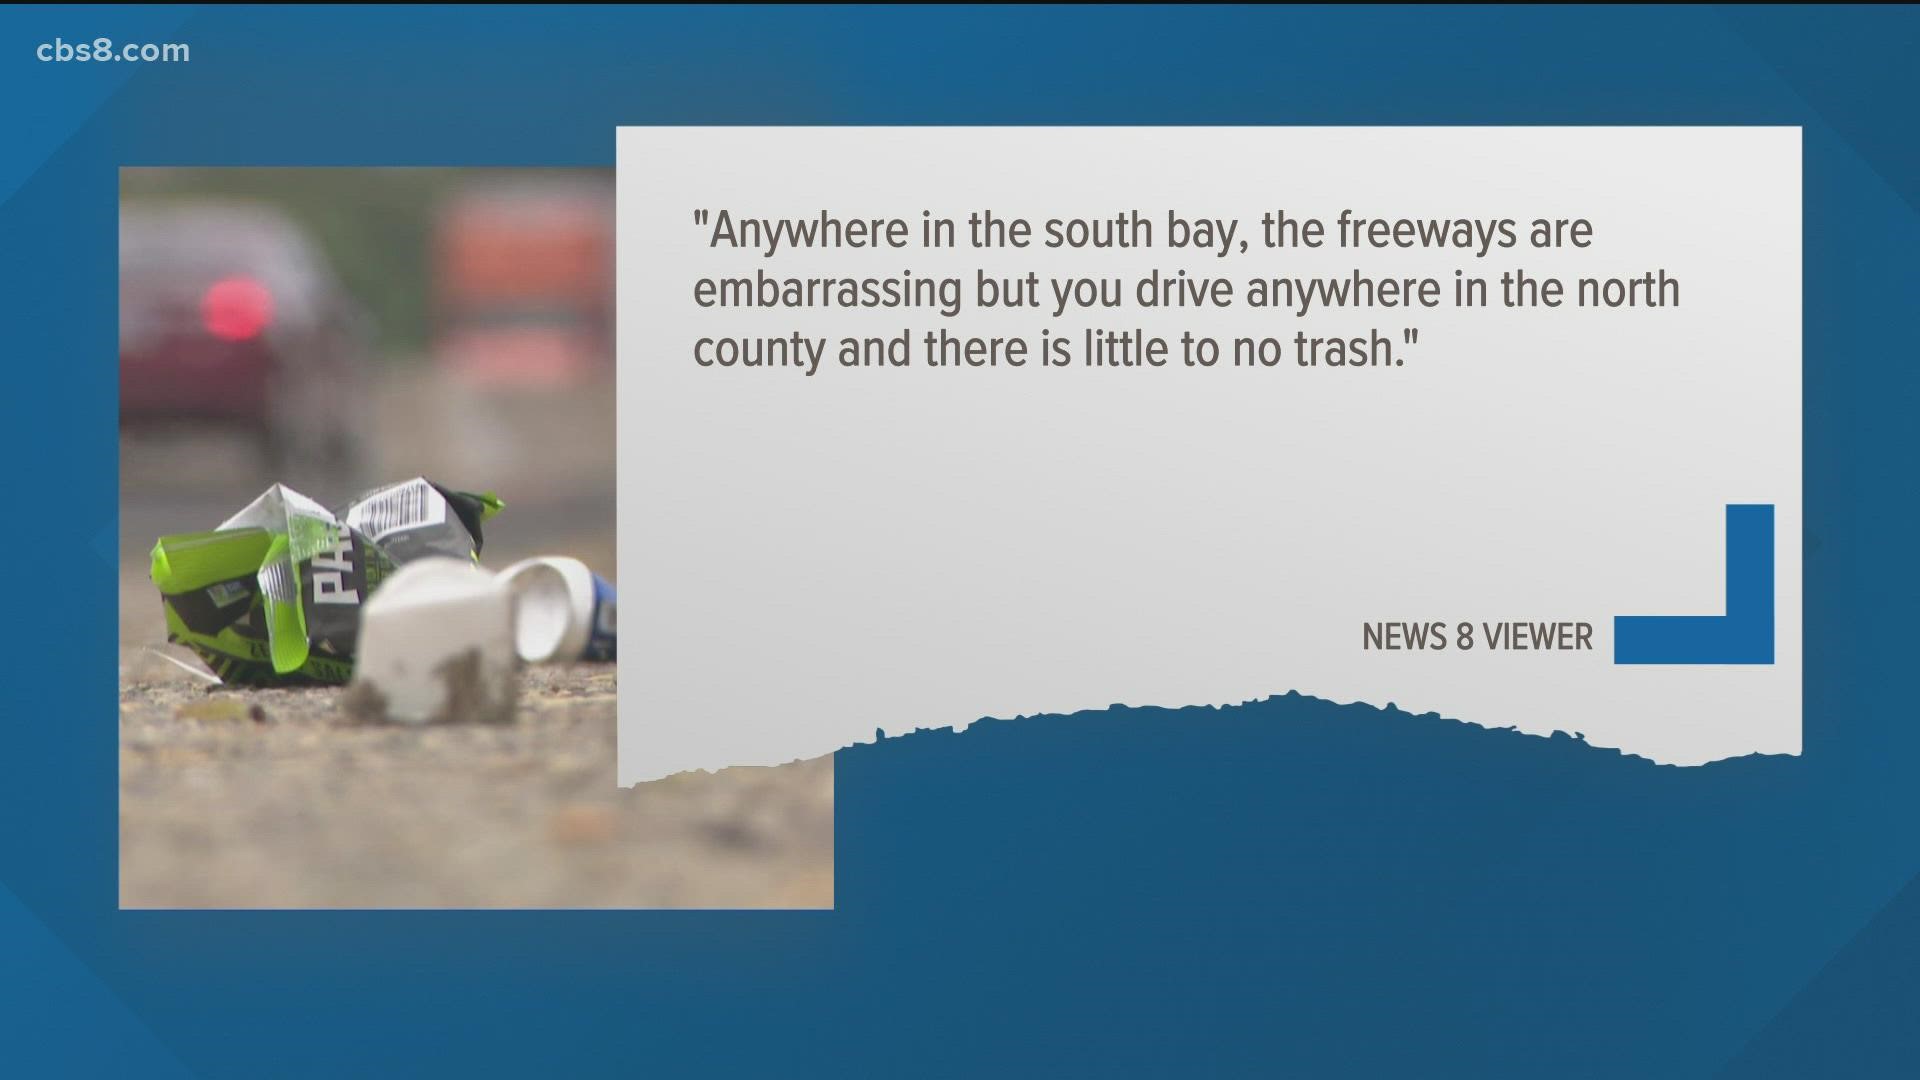 News 8 asked CALTRANS if North County San Diego freeways really were receiving more attention and resources than further south.